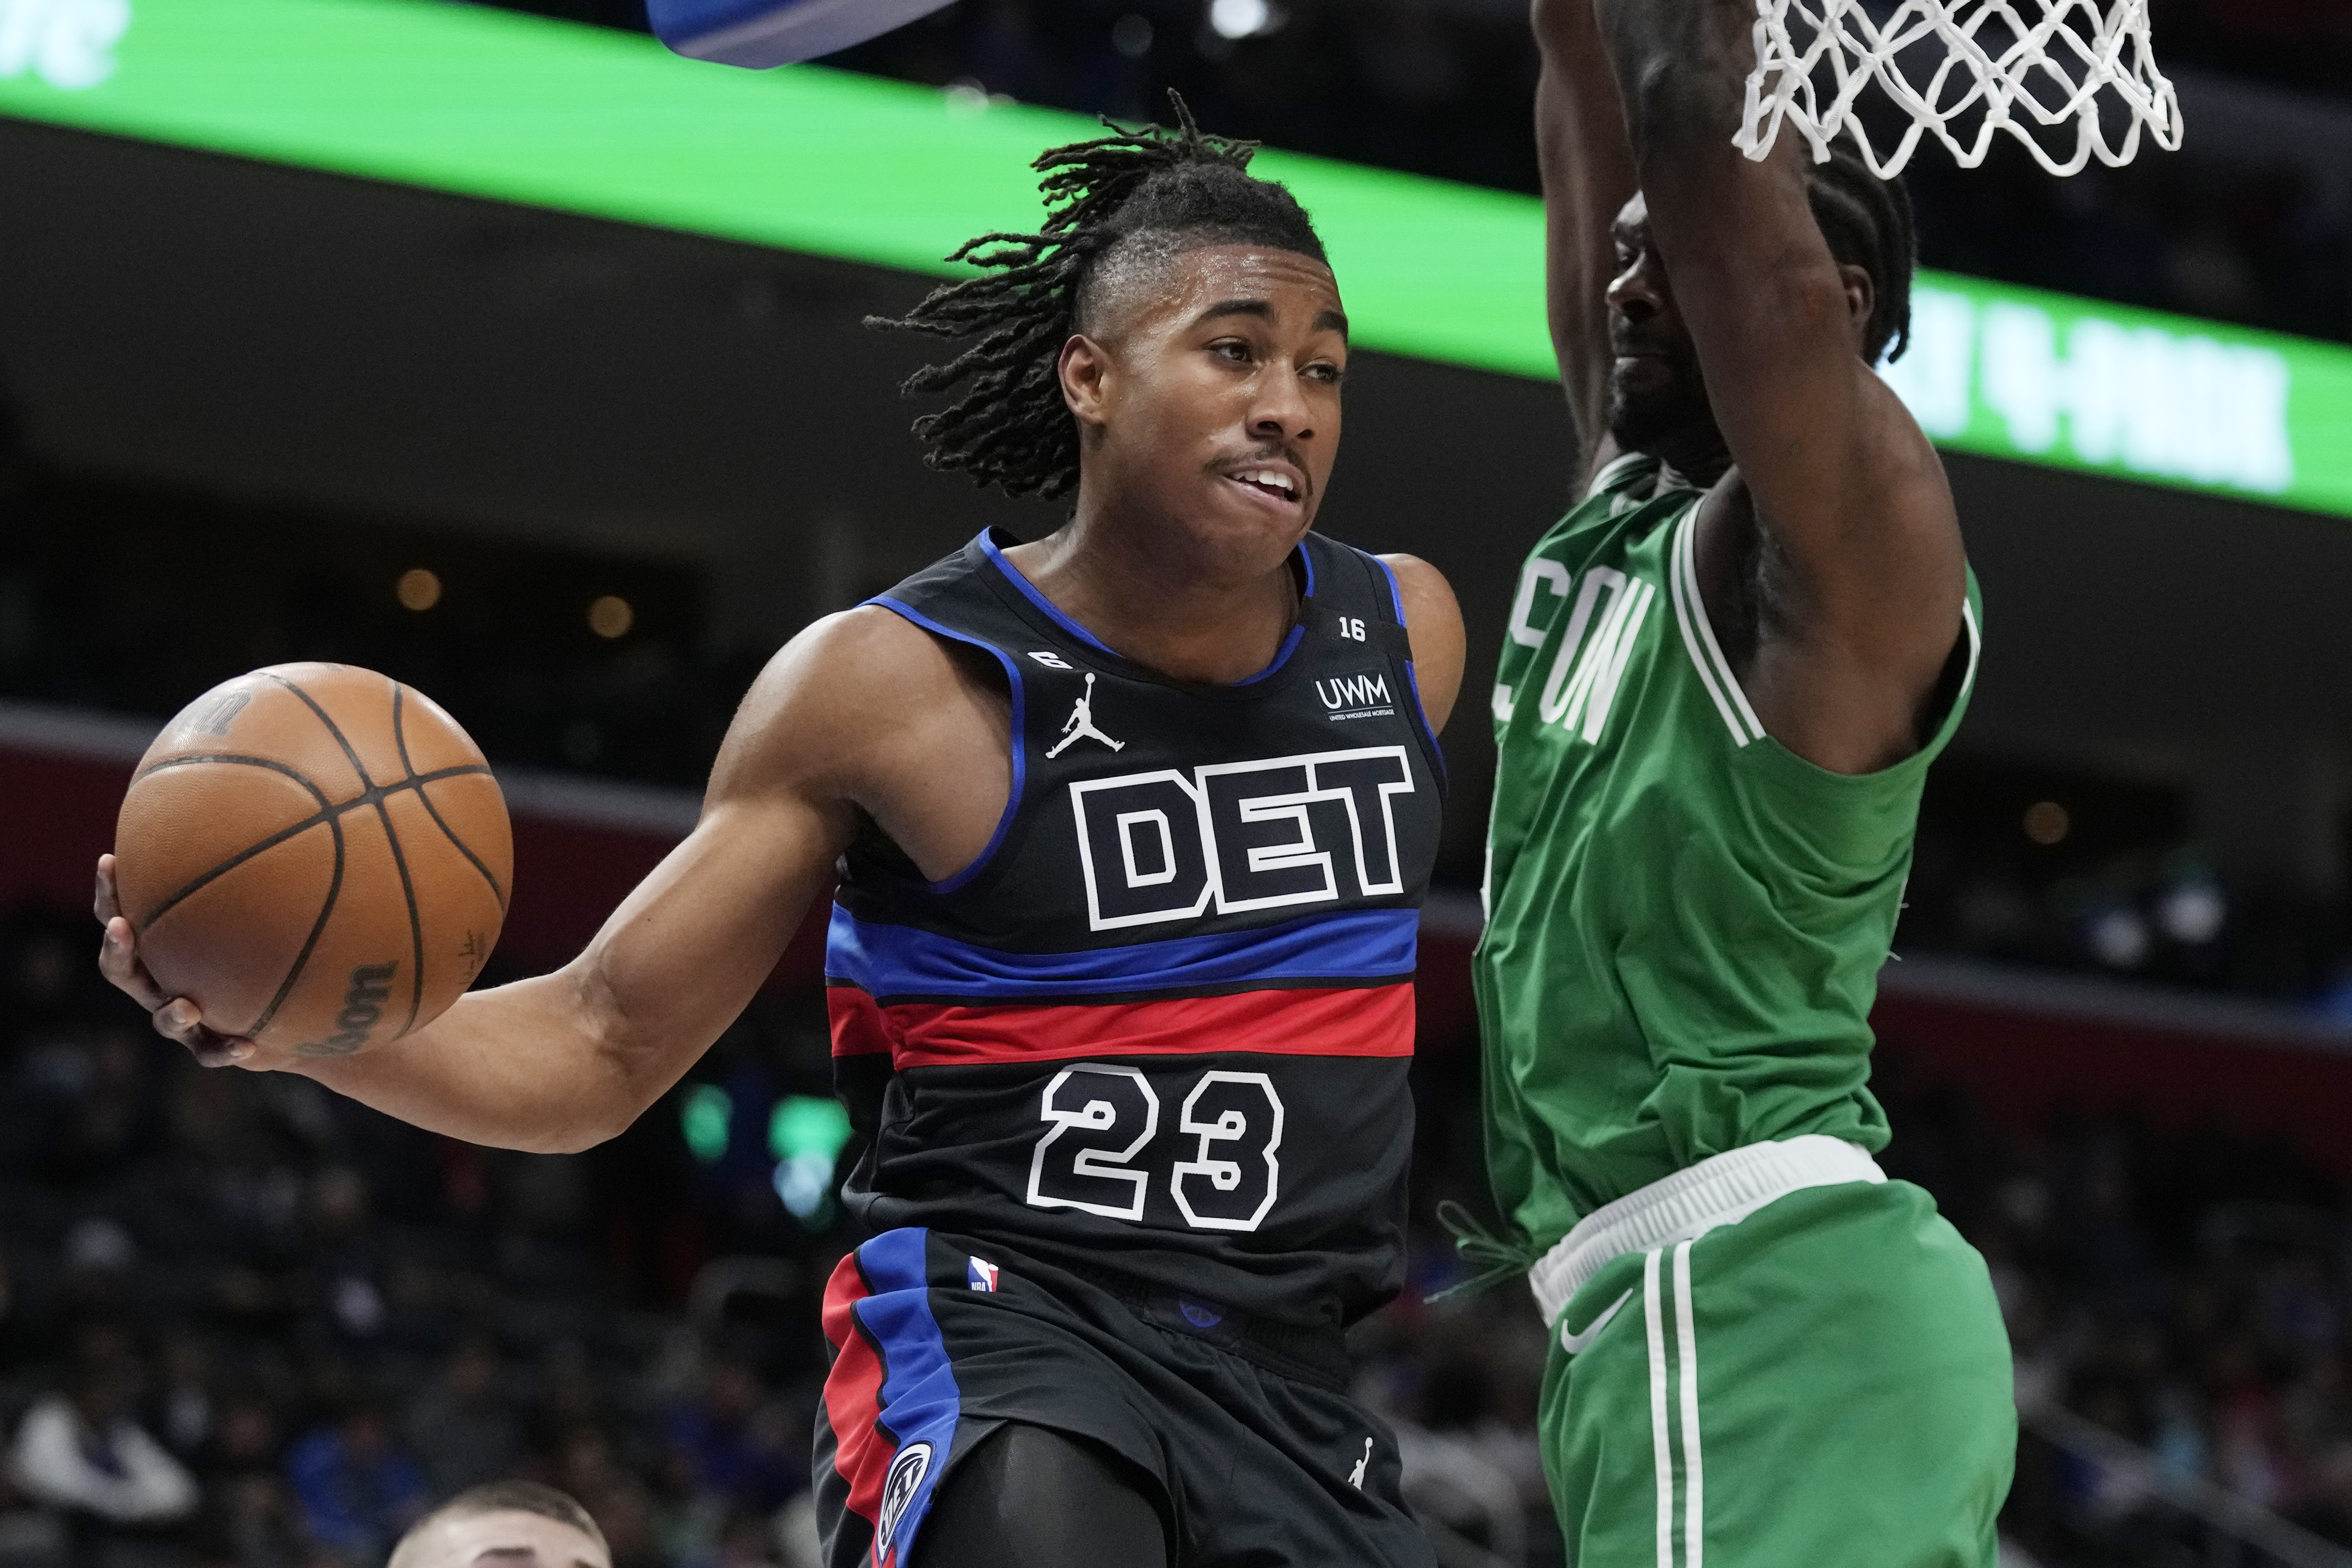 Jaden Ivey's development is a bright spot for the Pistons